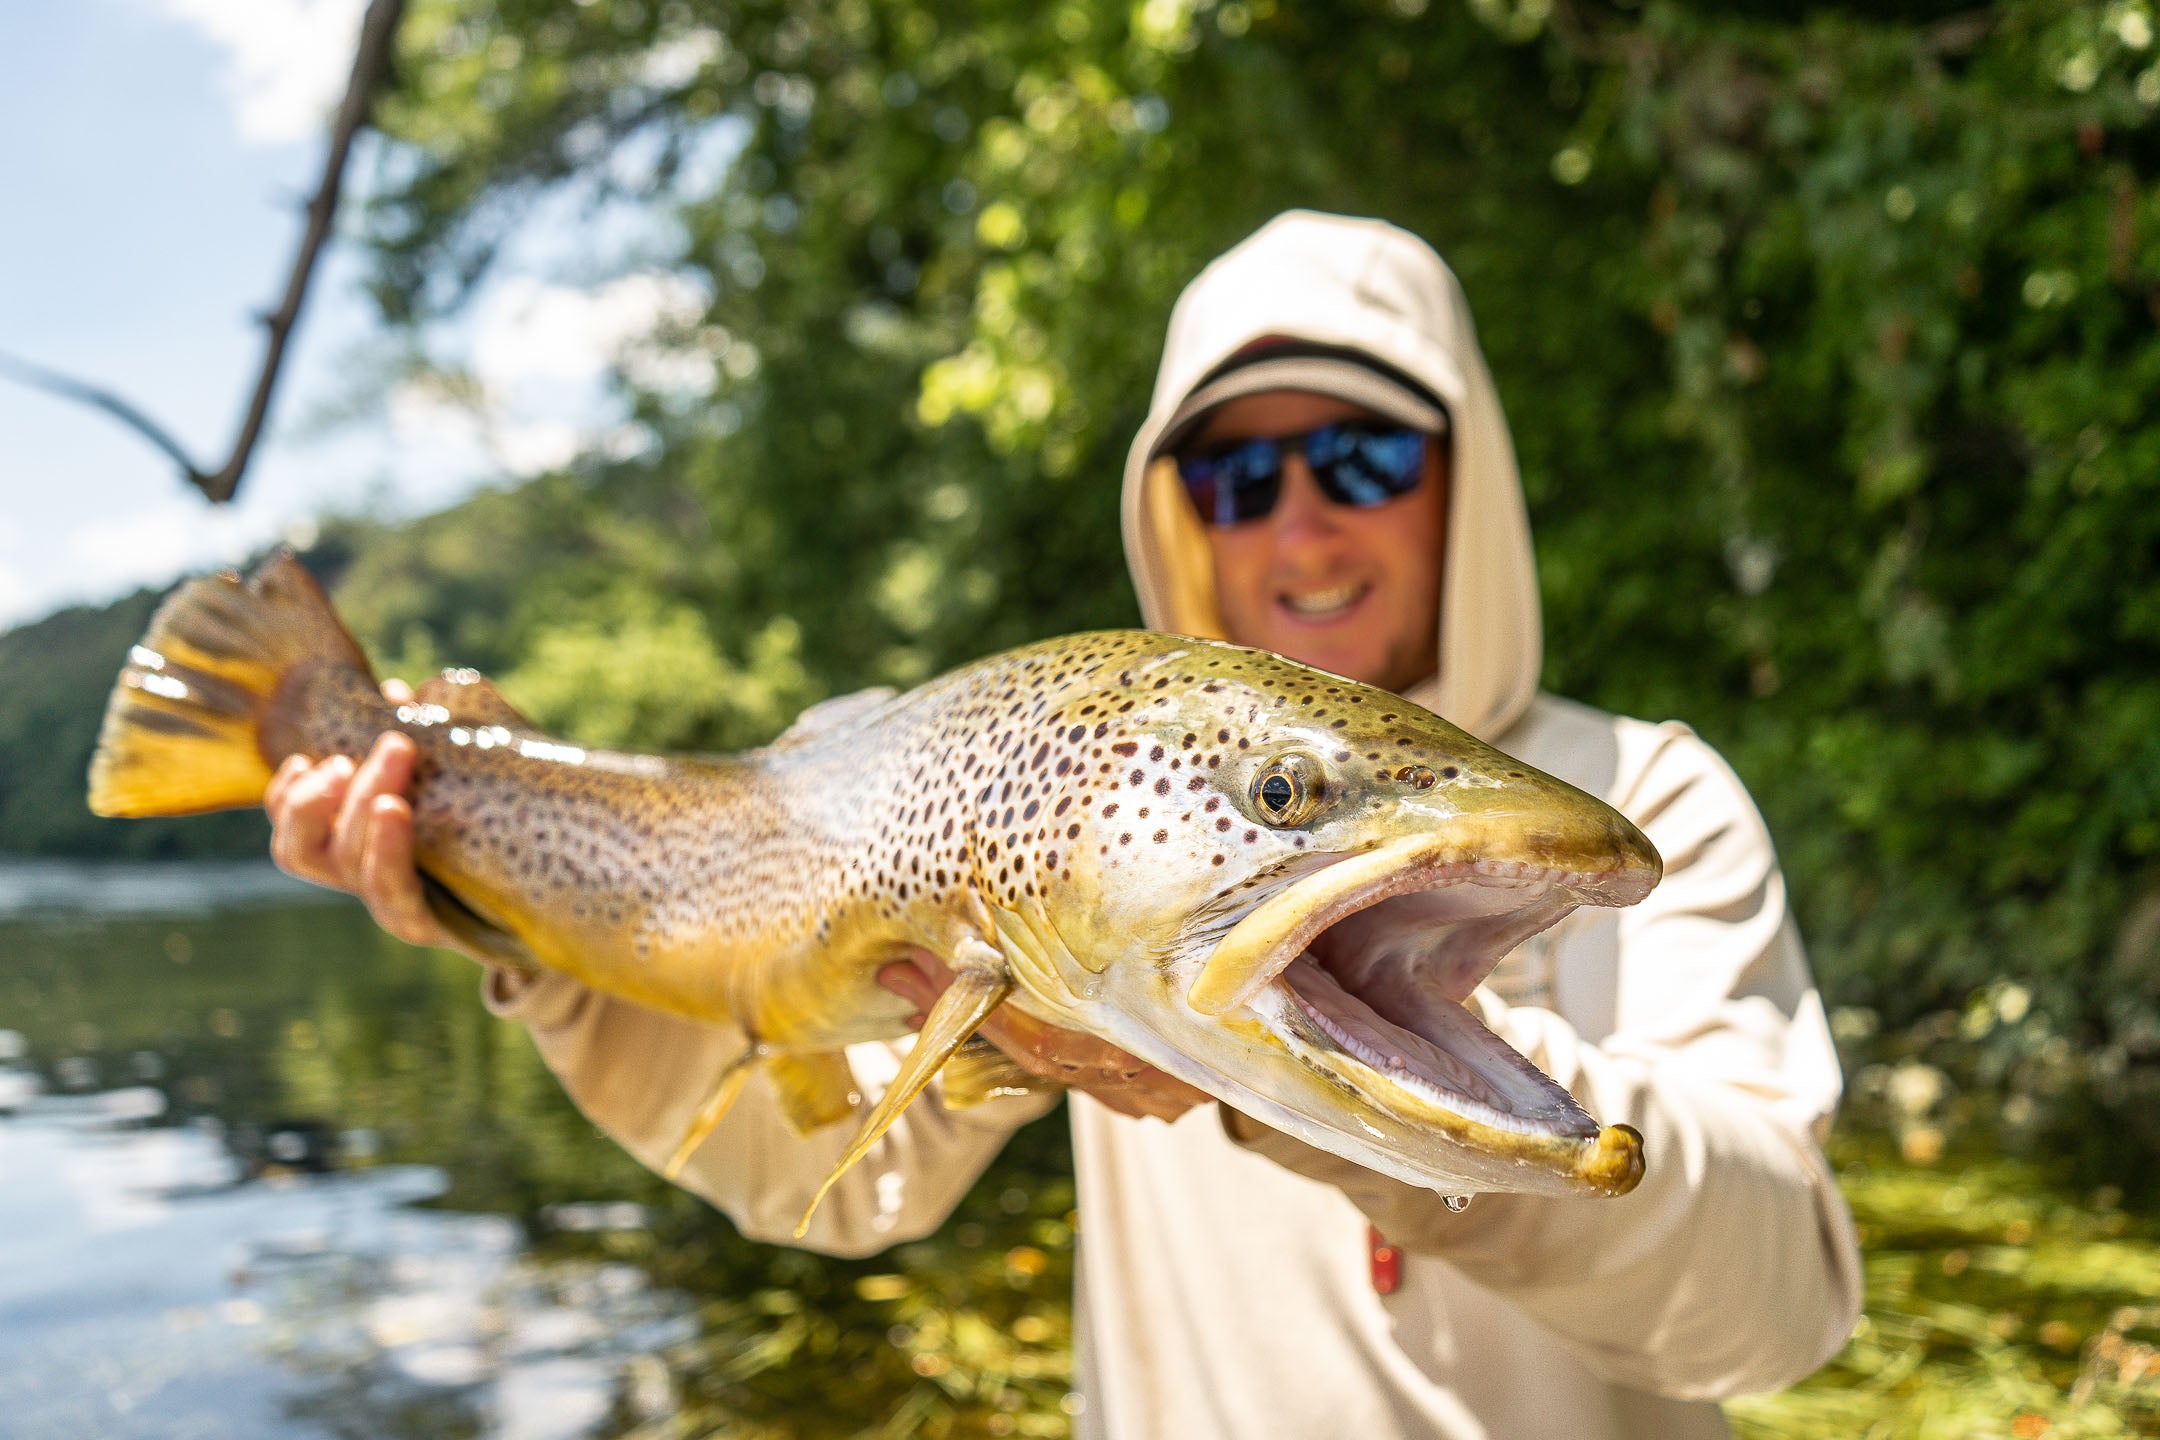 Roaring River Trout Fishing - ON THE FLY SOUTH